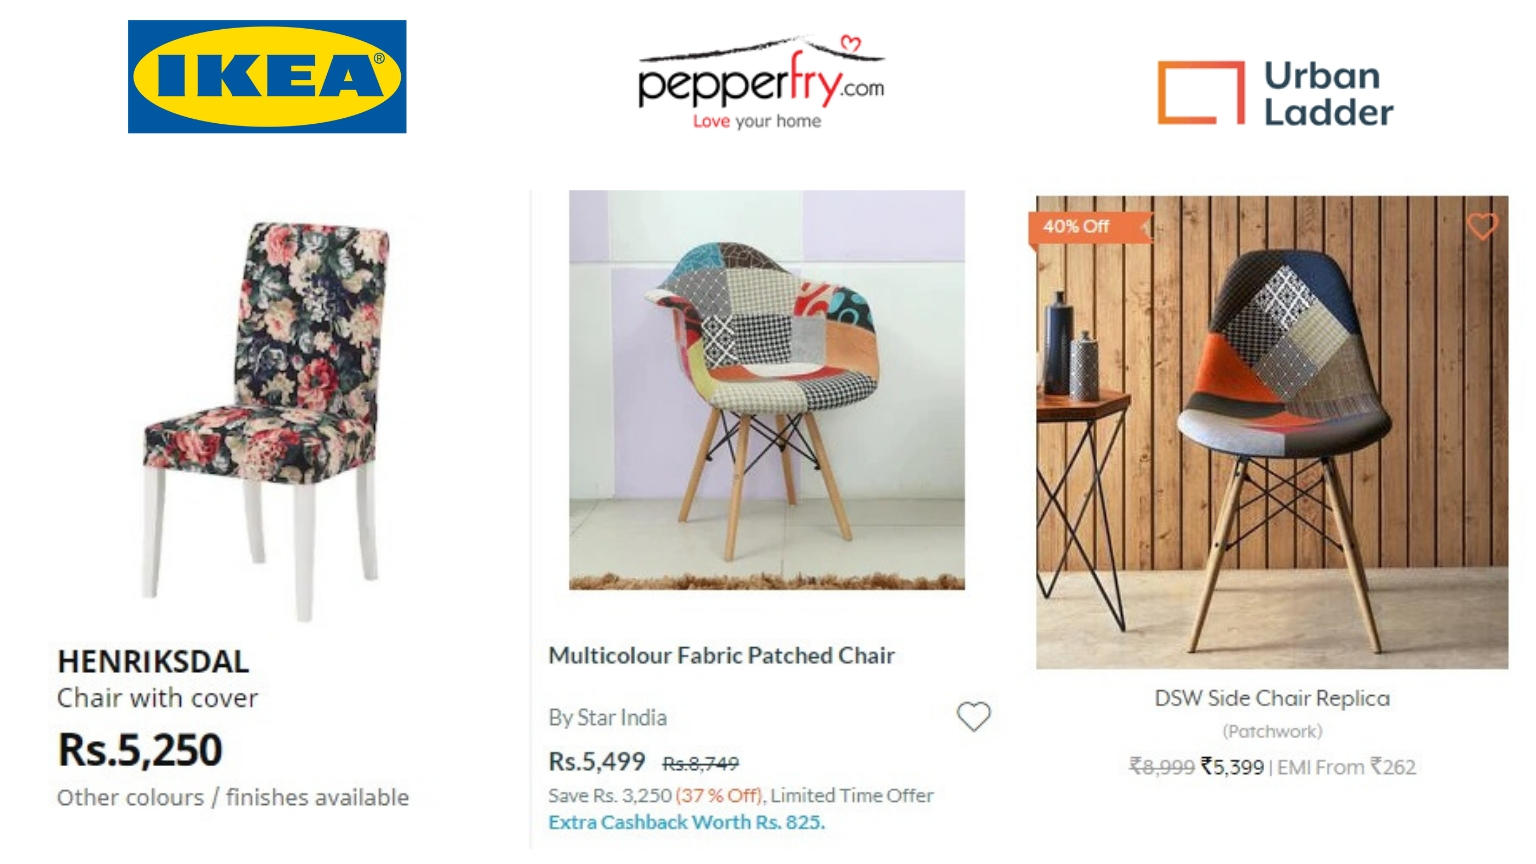 I Had 50 000 To Set Up My Room And Here Are The Options I Got From Ikea Pepperfry And Urban Ladder Business Insider India